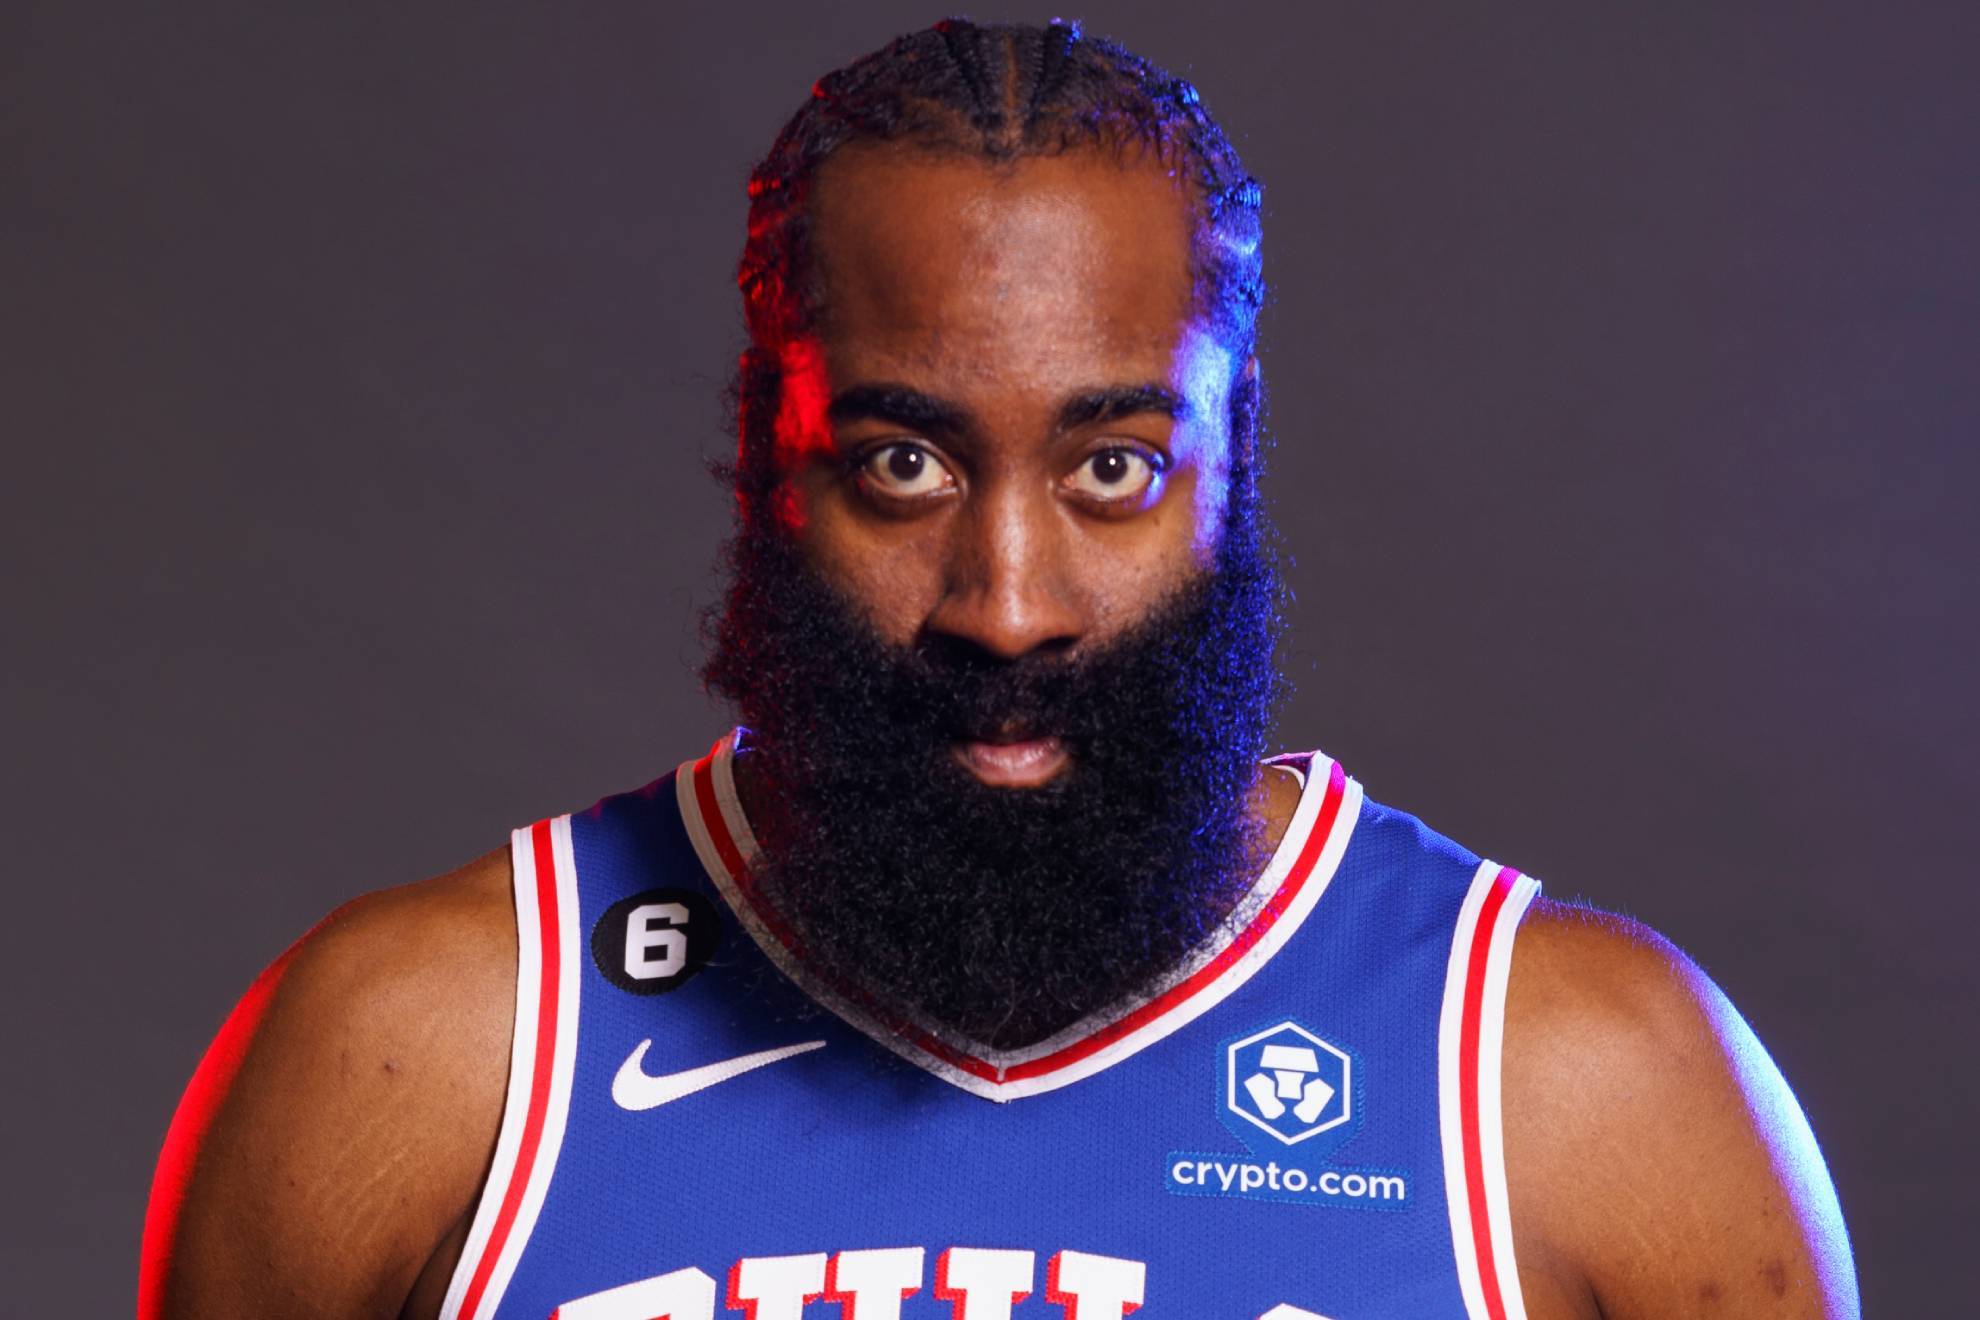 James Harden claims to have lost 45 kilos this summer... Should we believe him?